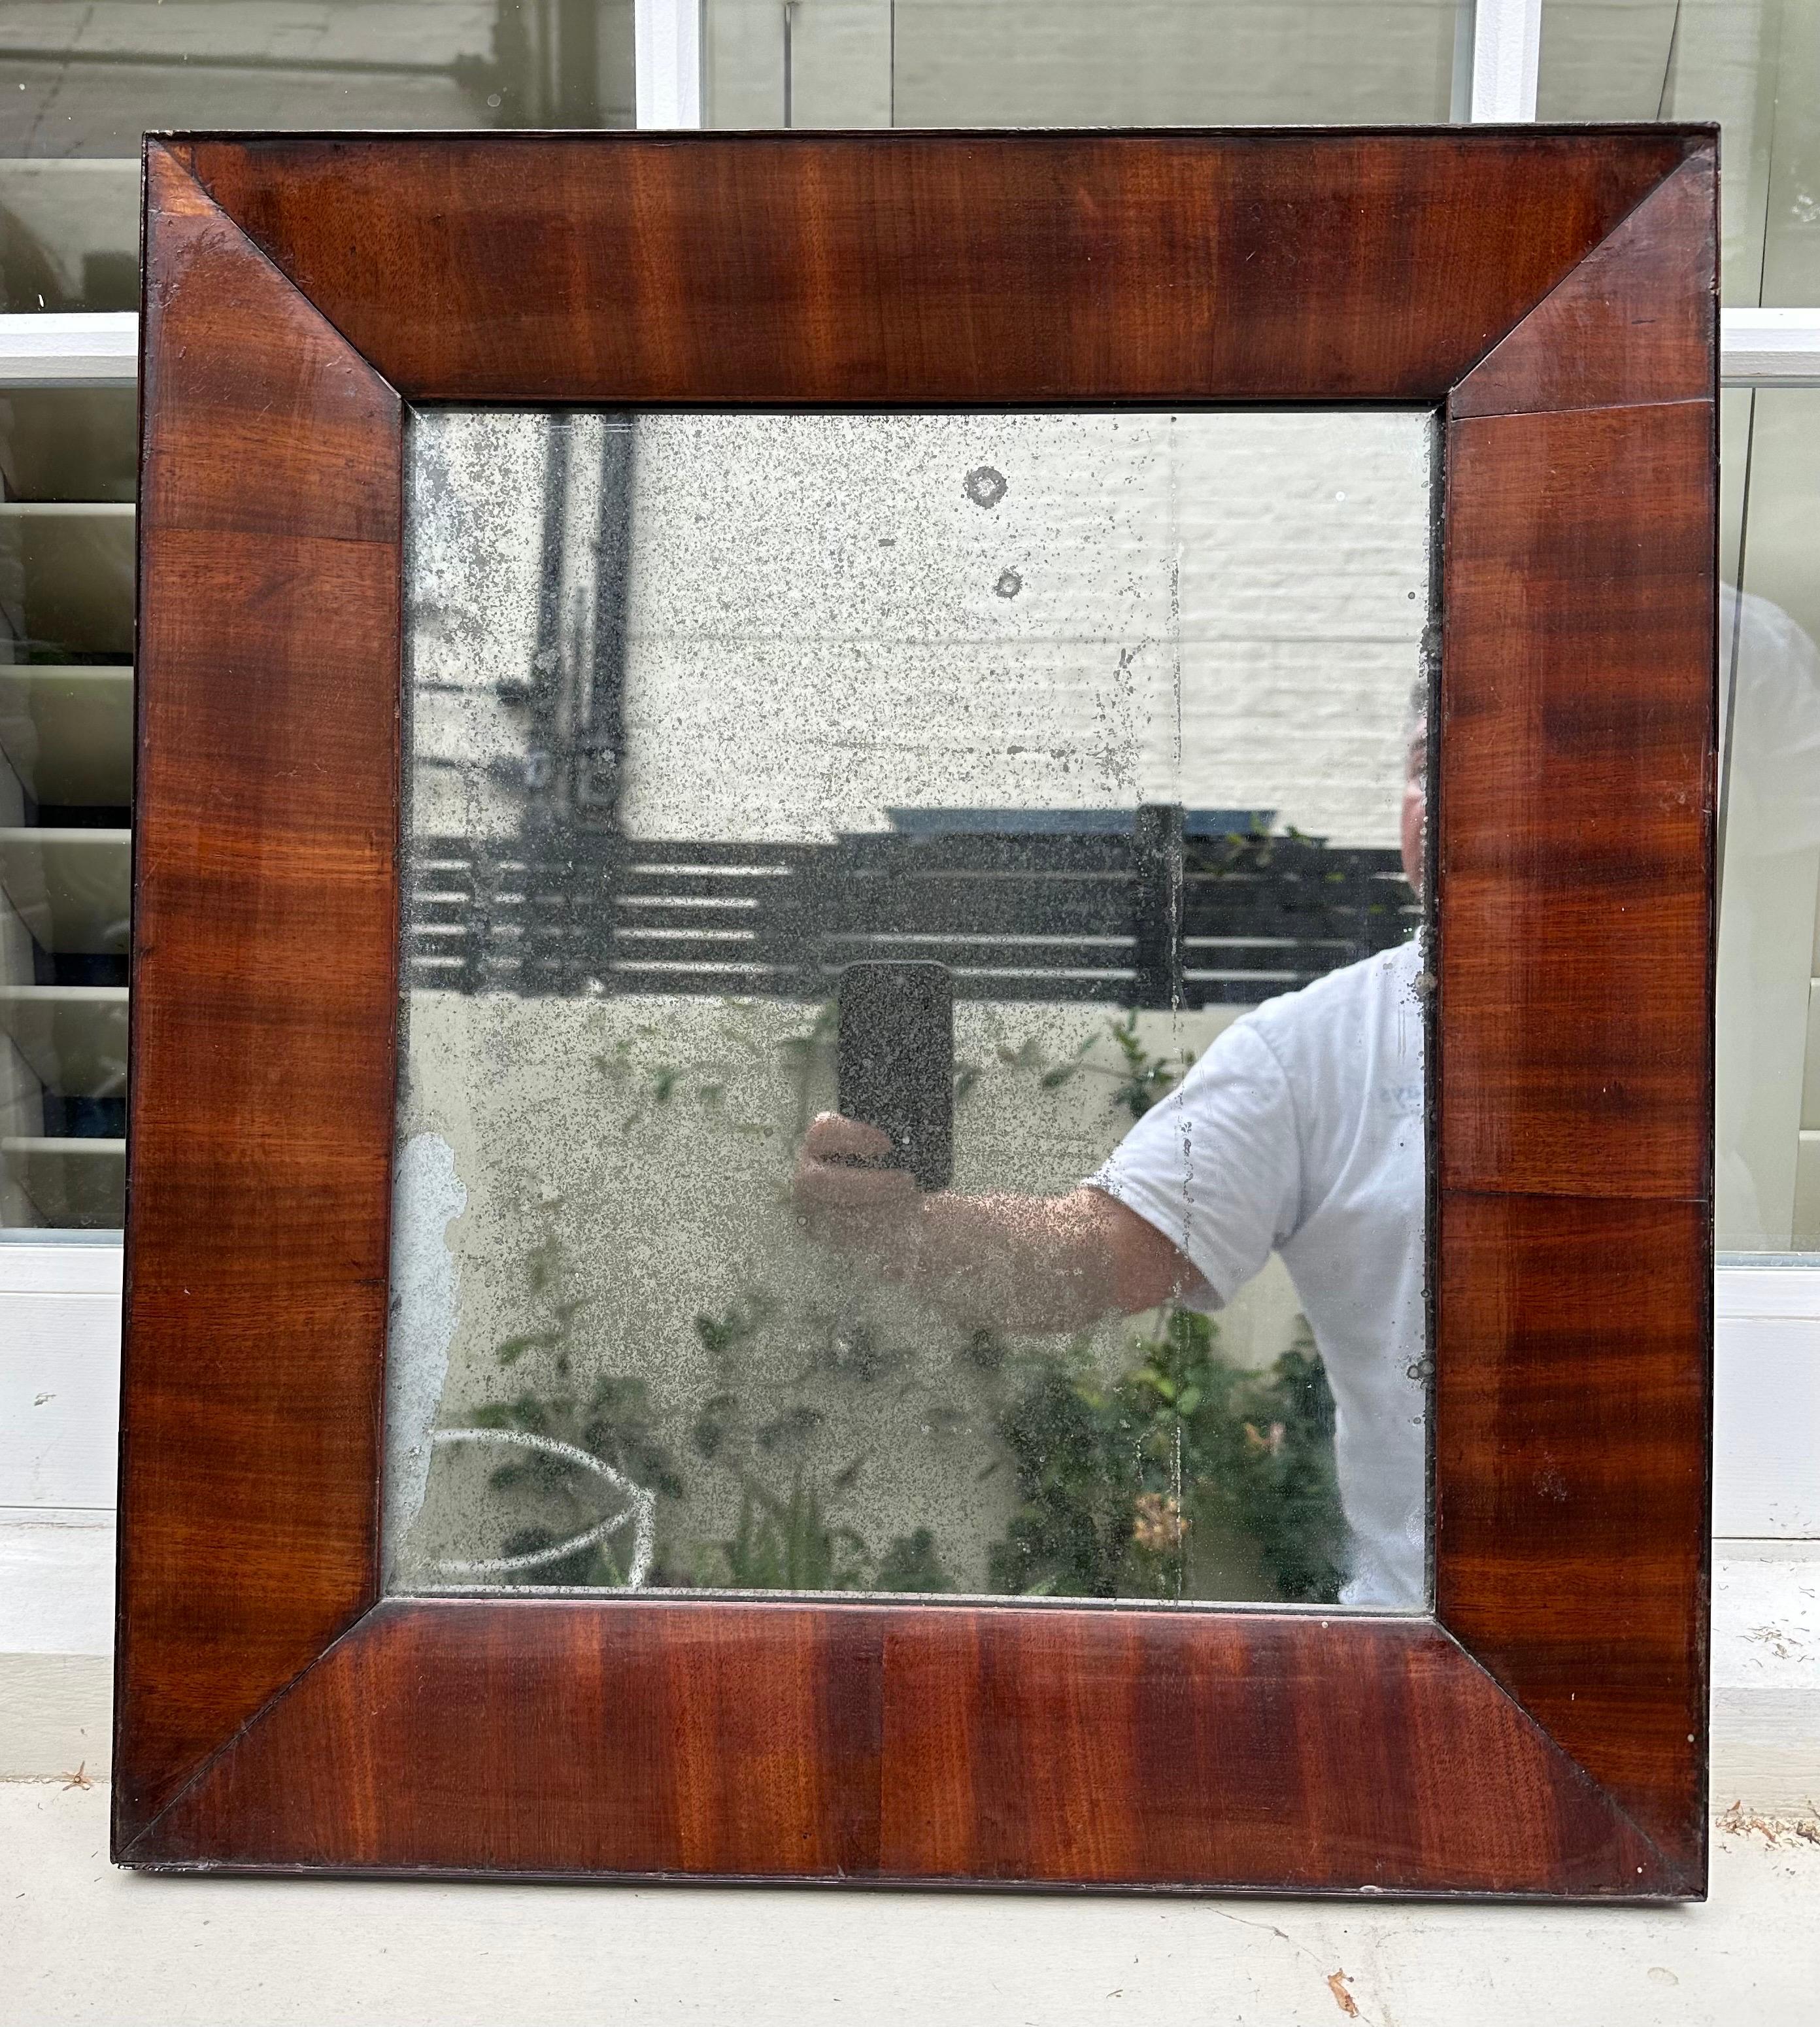 A truly decorative pair of deep red flame mahogany wood mirrors. The mirror glass has heavy patination in keeping with their age which enhances their decorative value. Extremely elegant in any interior and would complement a variety of